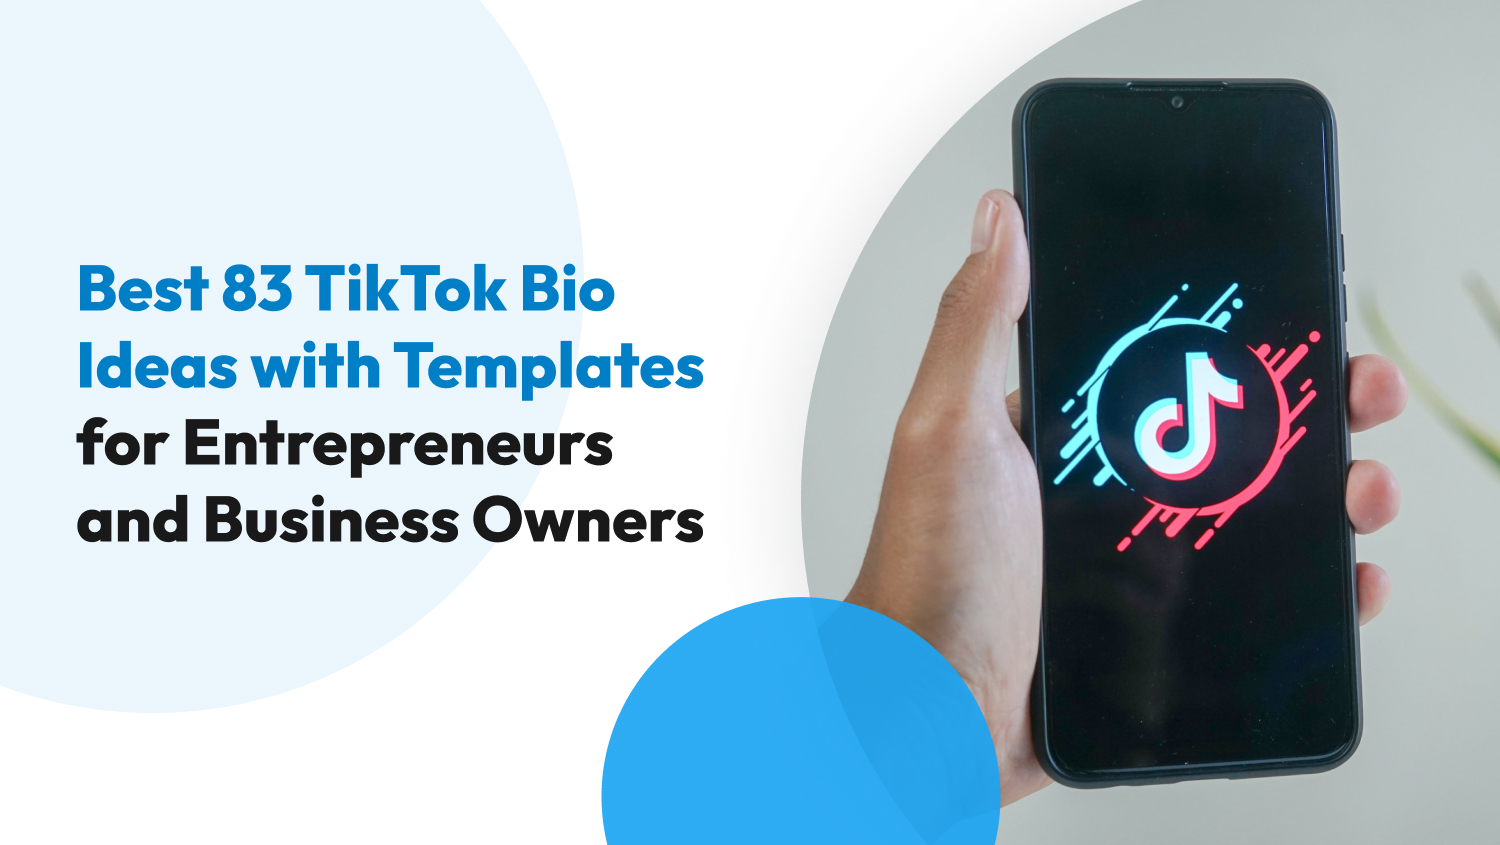 Best 83 TikTok Bio Ideas with Templates for Entrepreneurs and Business Owners